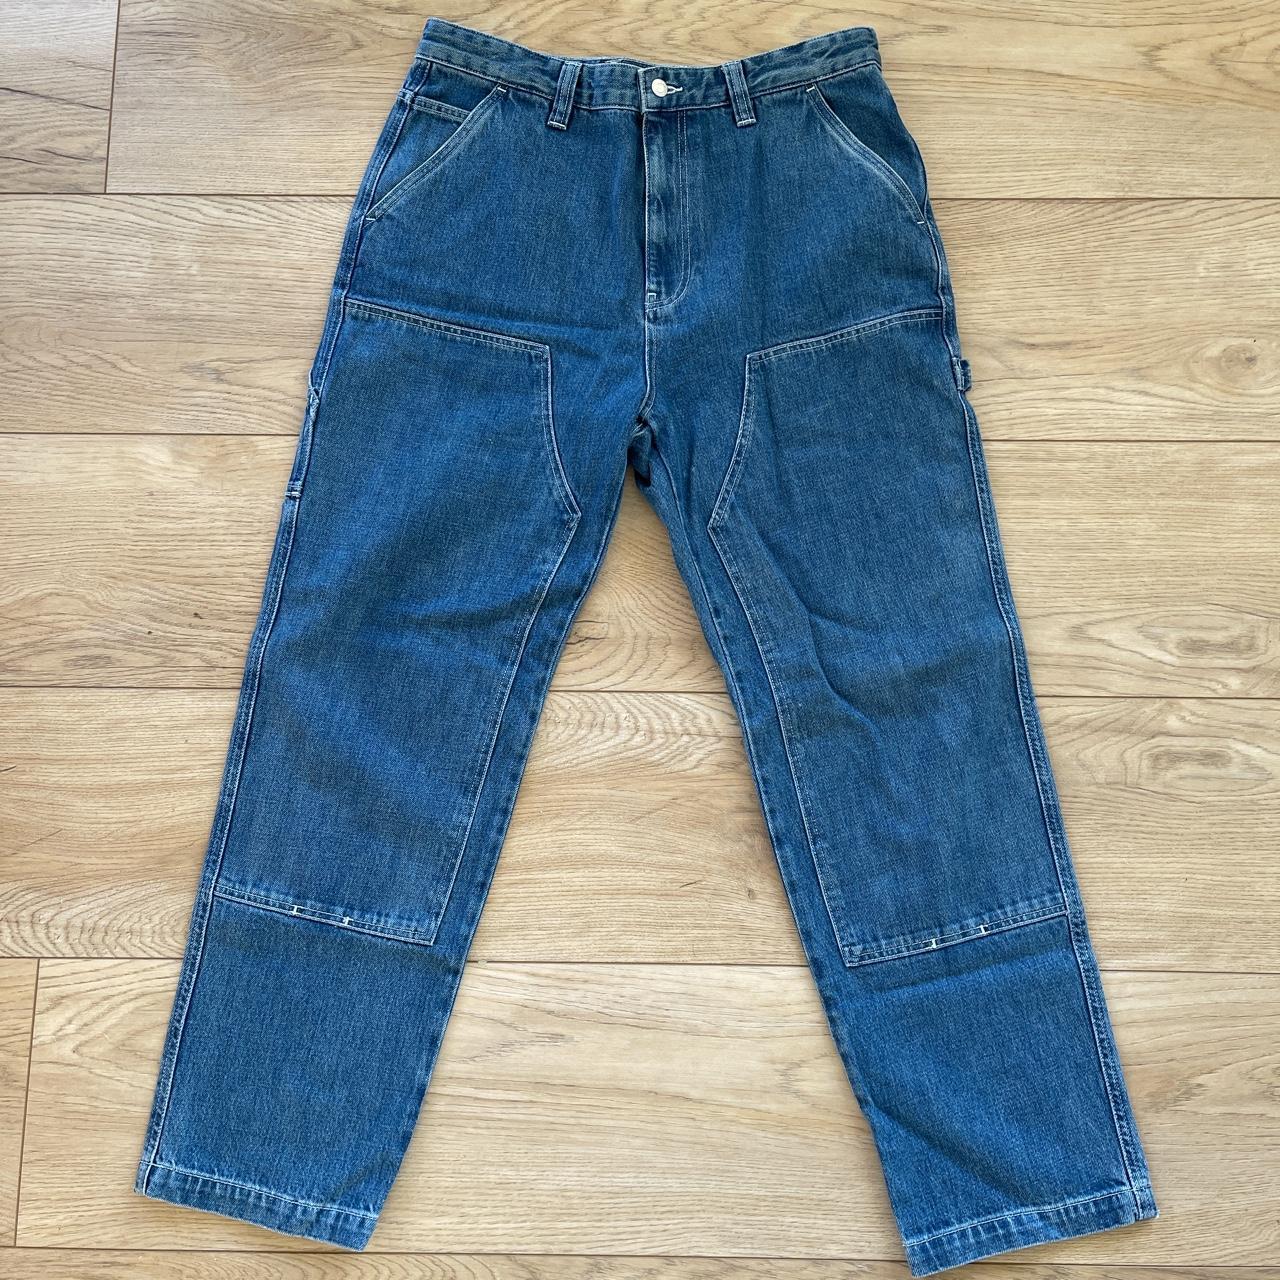 Stussy double knee jeans. Wore these twice, still in... - Depop